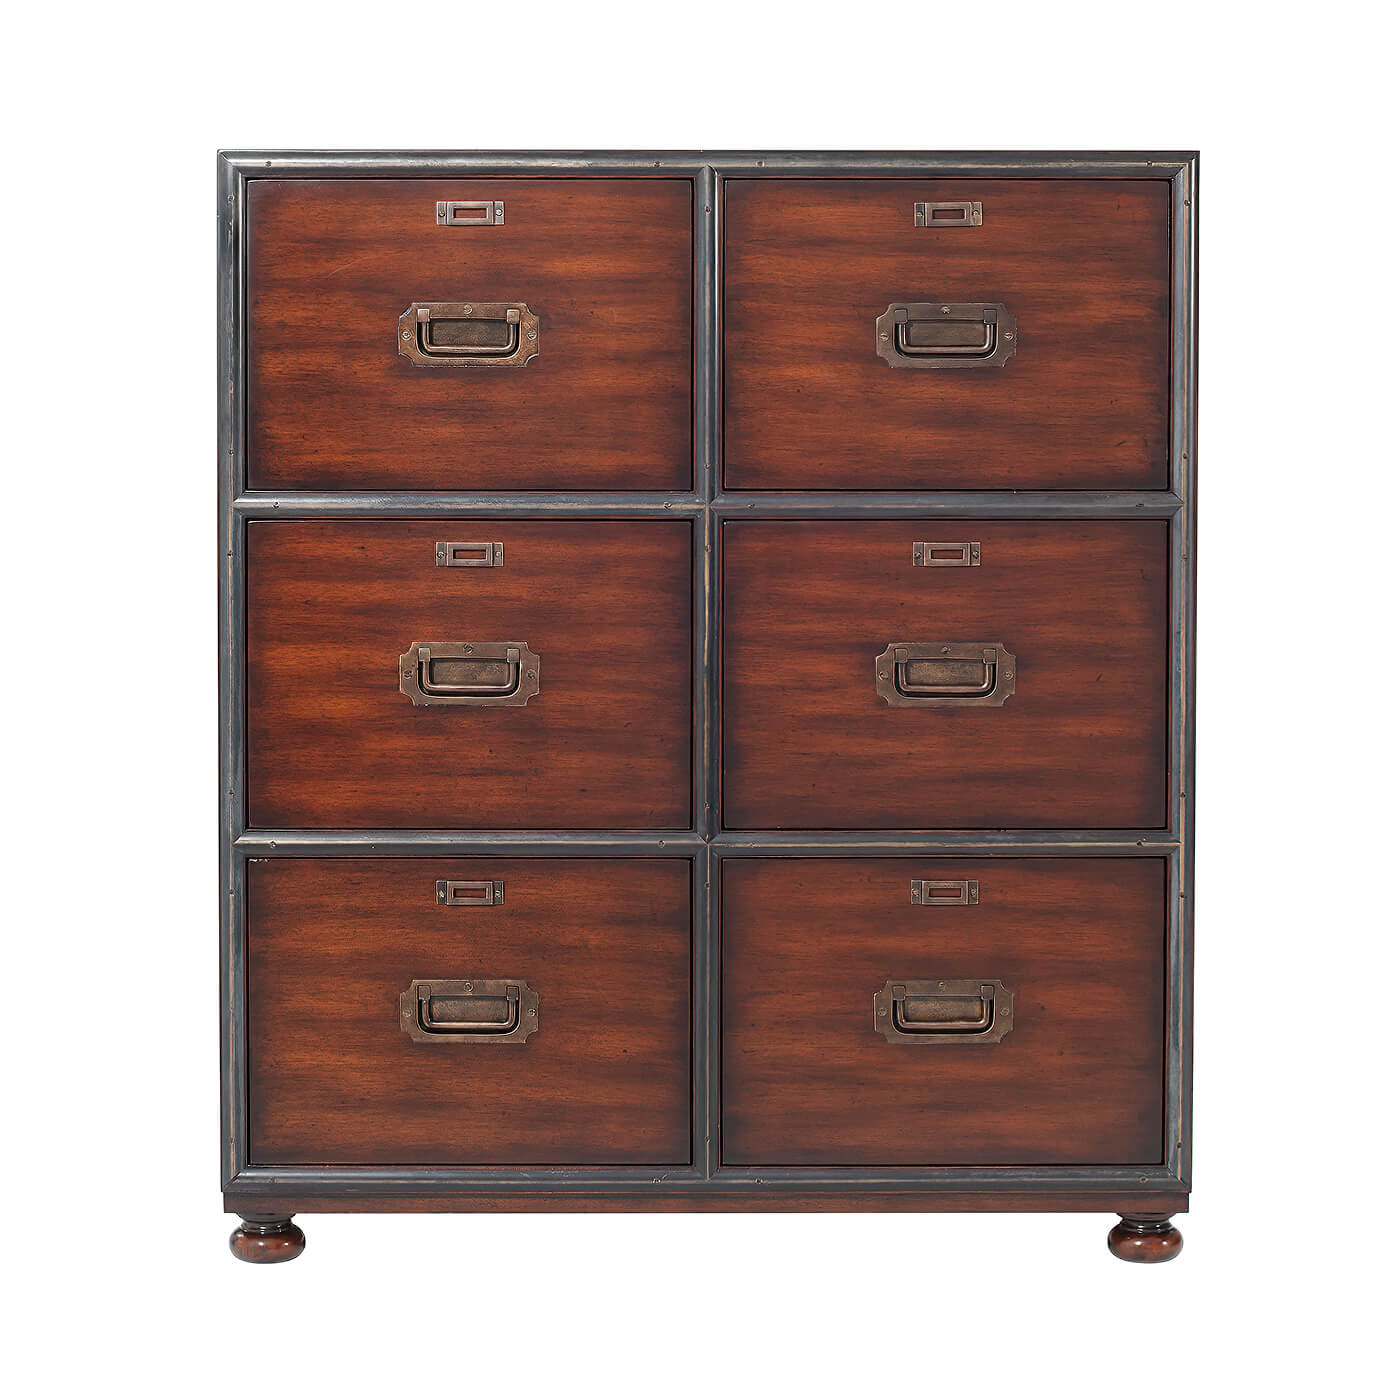 Campaign Style Six Drawer Chest - English Georgian America